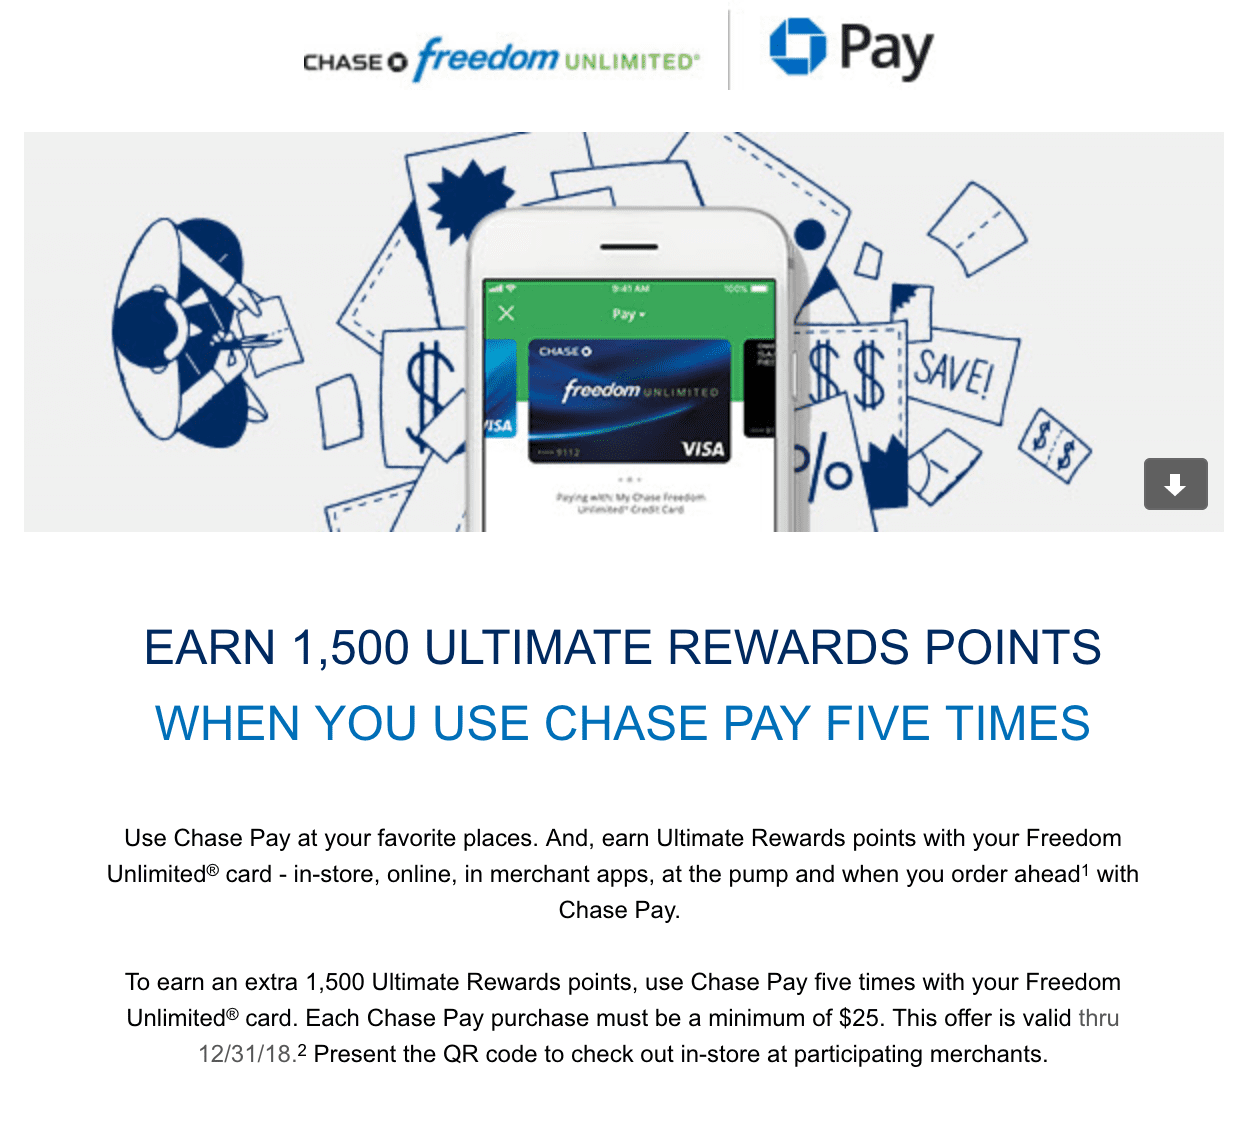 Expired] Chase Cards: Use Chase Pay 5 Times and Get 1,500 Ultimate